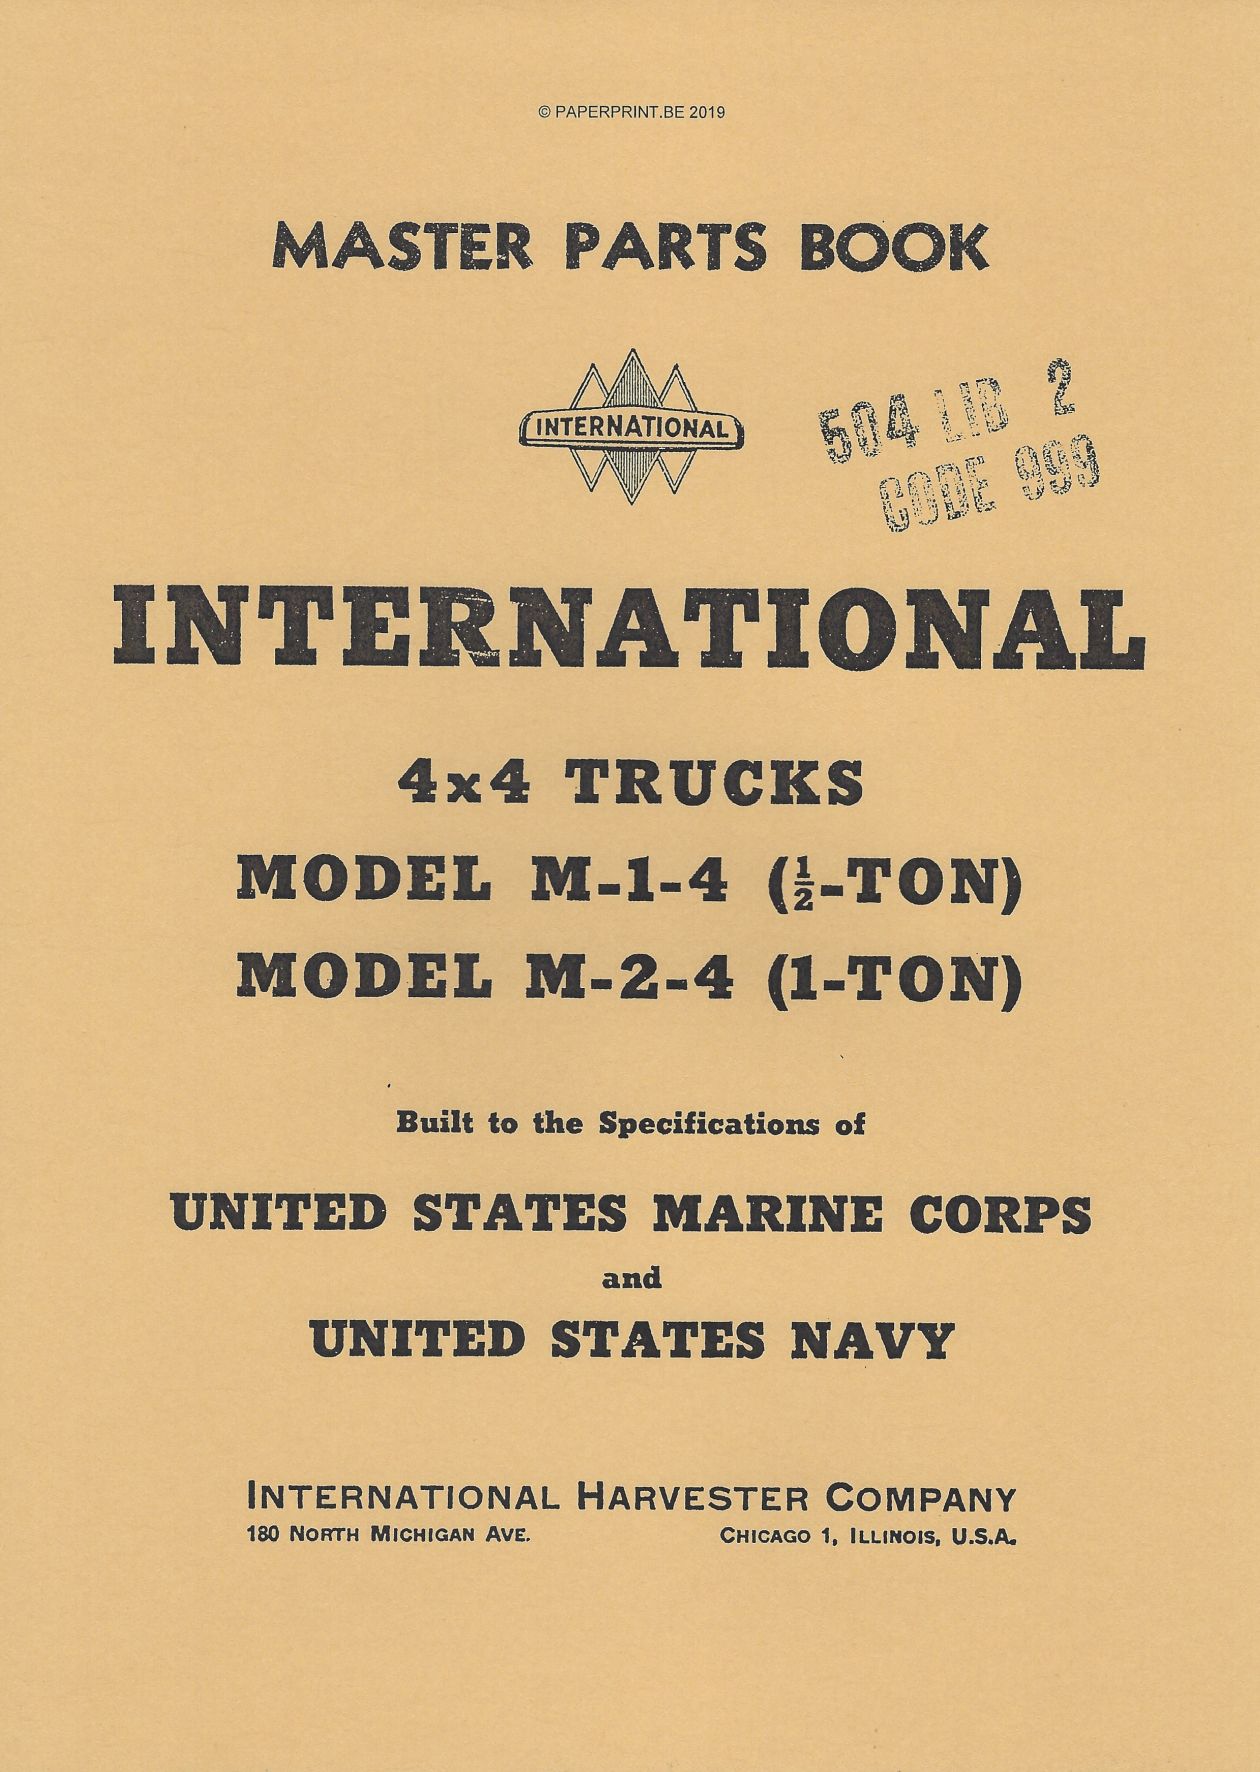 INTERNATIONAL 4 x 4 M-1-4 AND M-2-4 MASTER PARTS BOOK